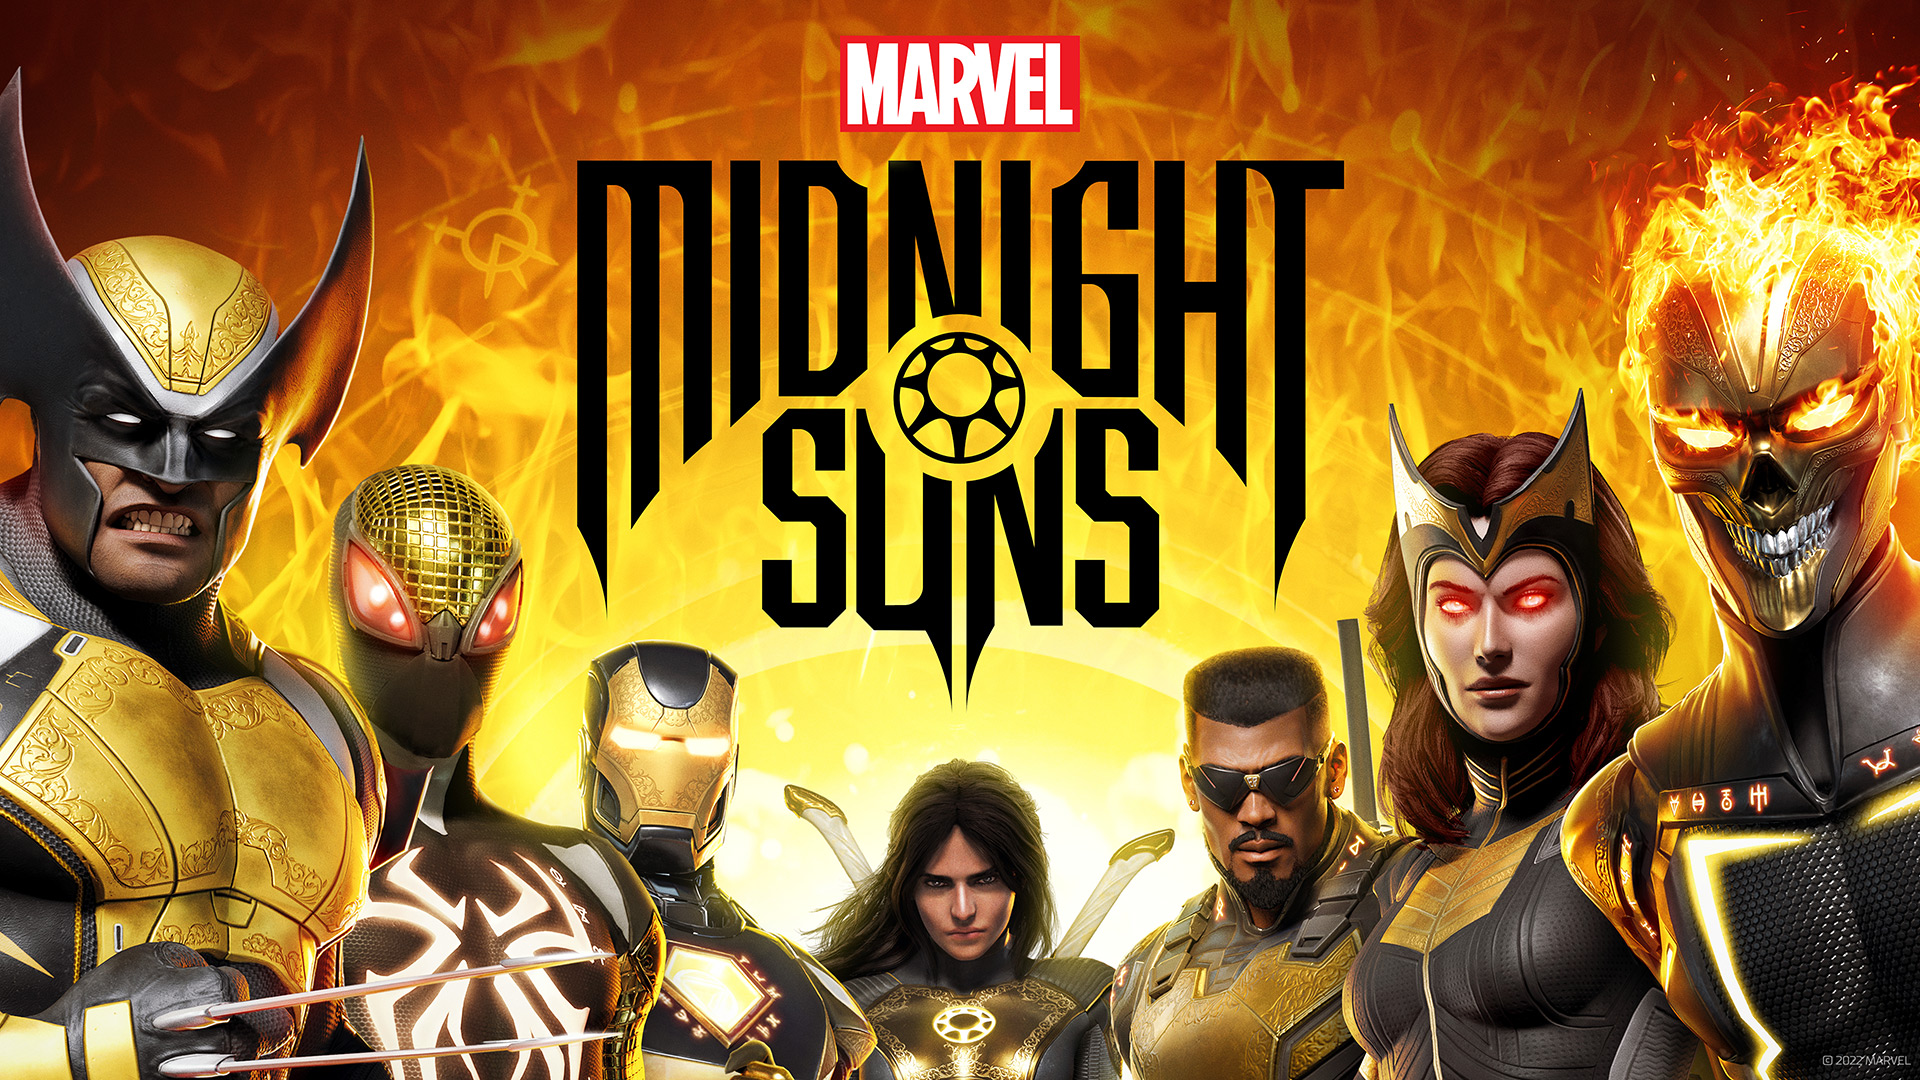 Marvel's Midnight Suns is no longer heading to the Nintendo Switch